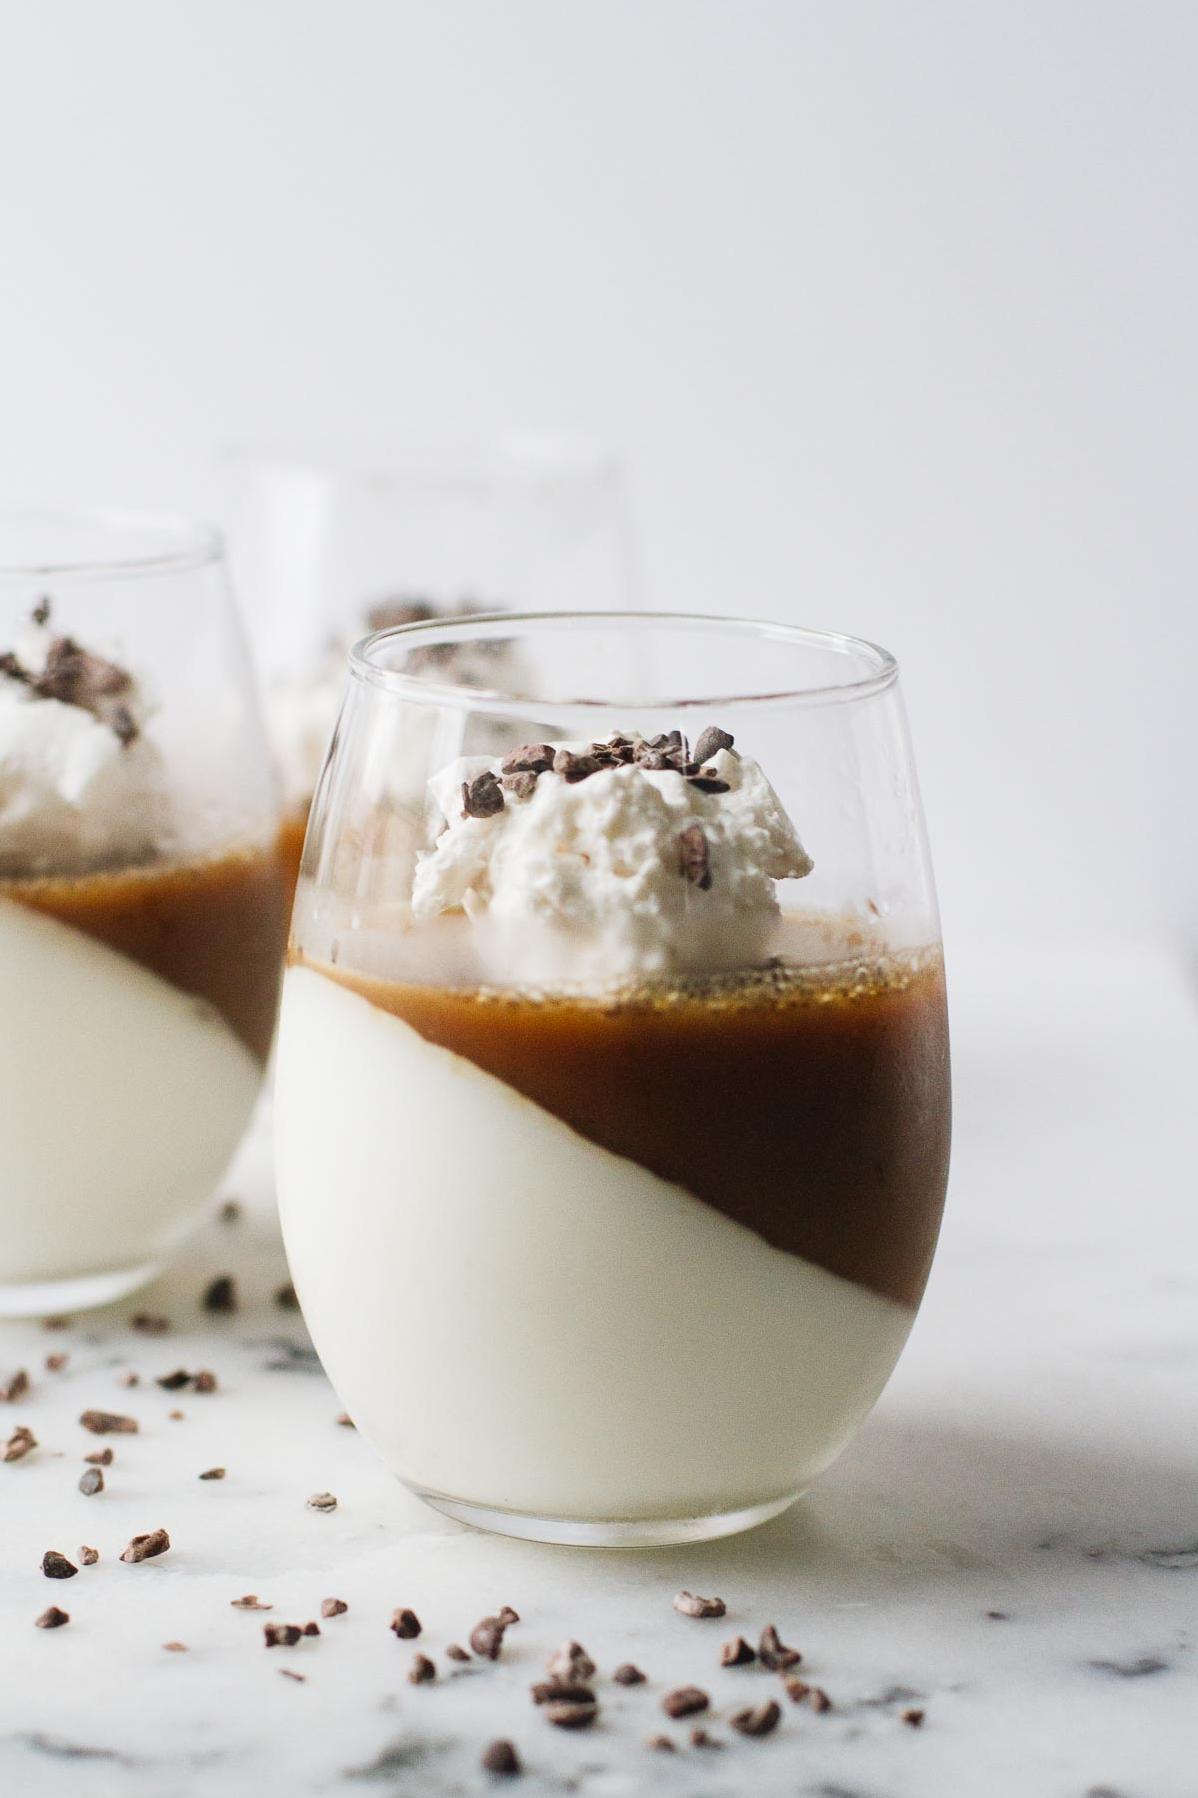  A silky and smooth dessert that will take your coffee game to the next level.